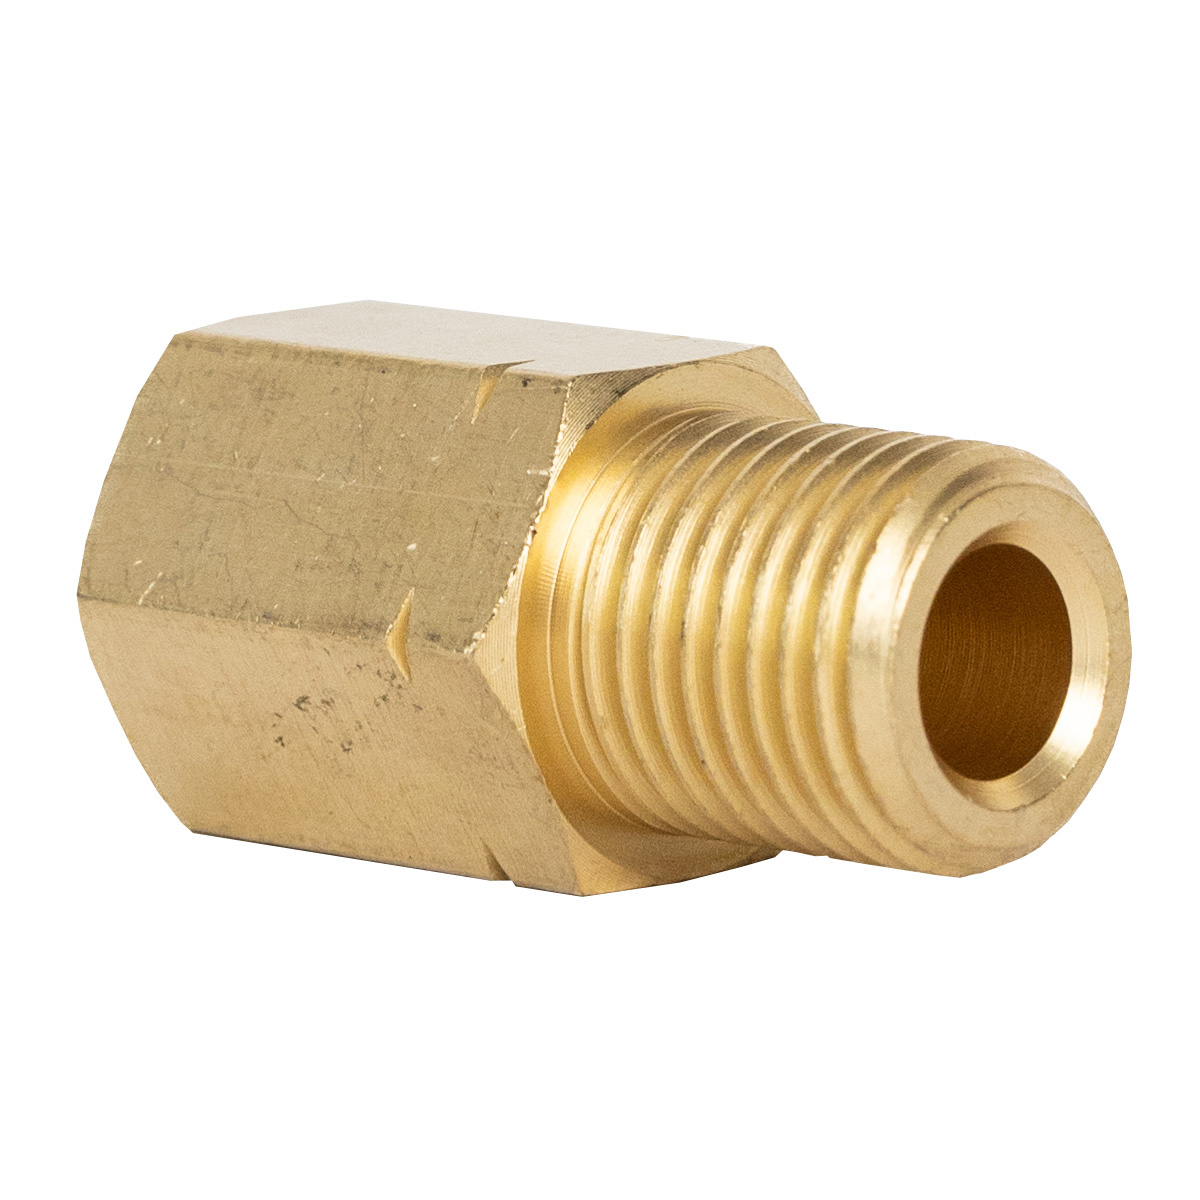 Airbrush Air Hose 1/8 BSP Male to 1/4 BSP Male Fitting Connector